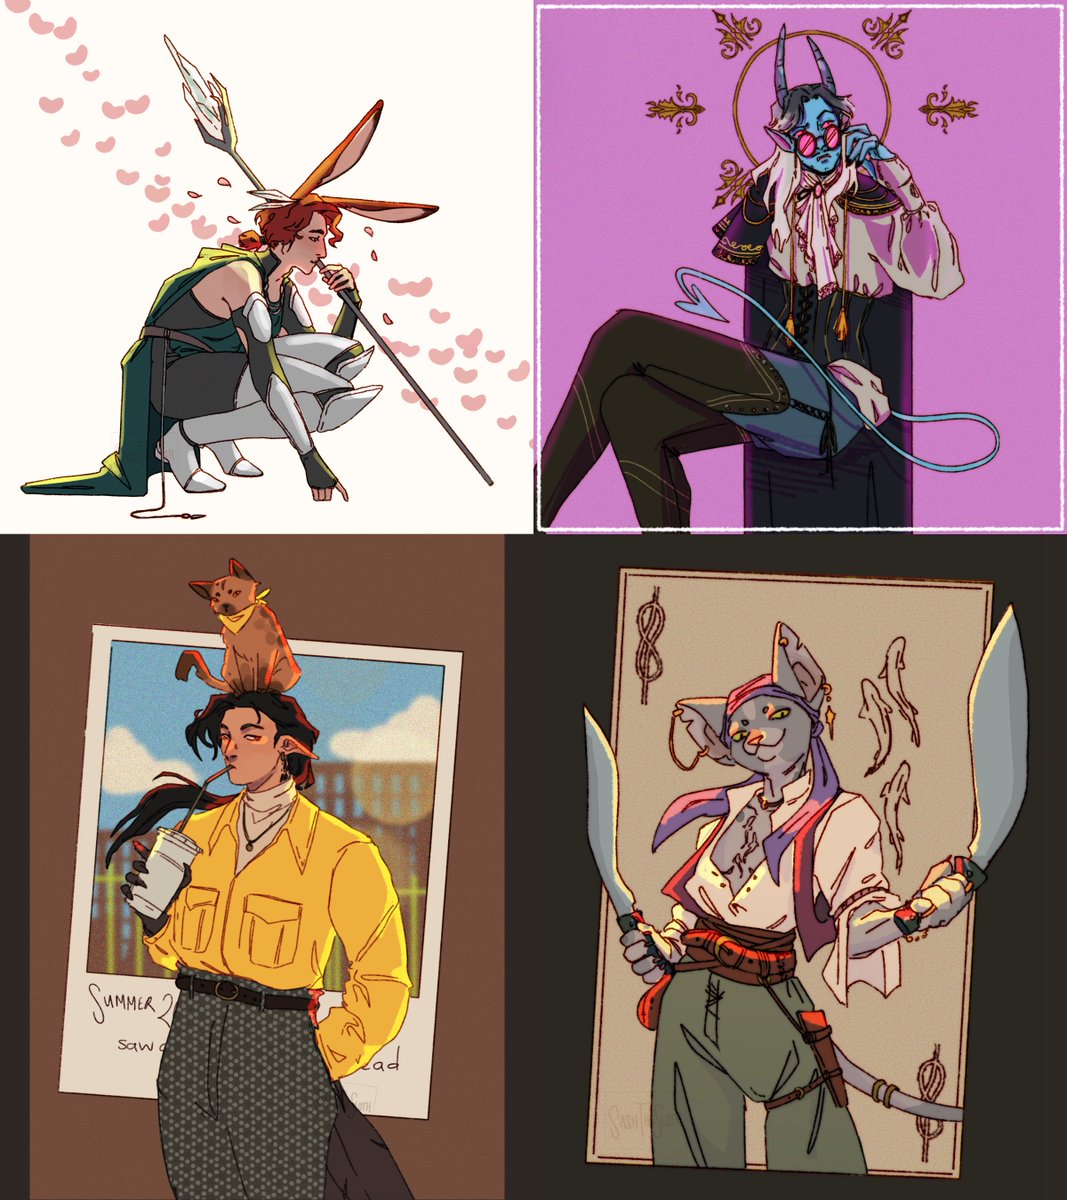 Happy Artfight, here are some of the ones I've done so far!